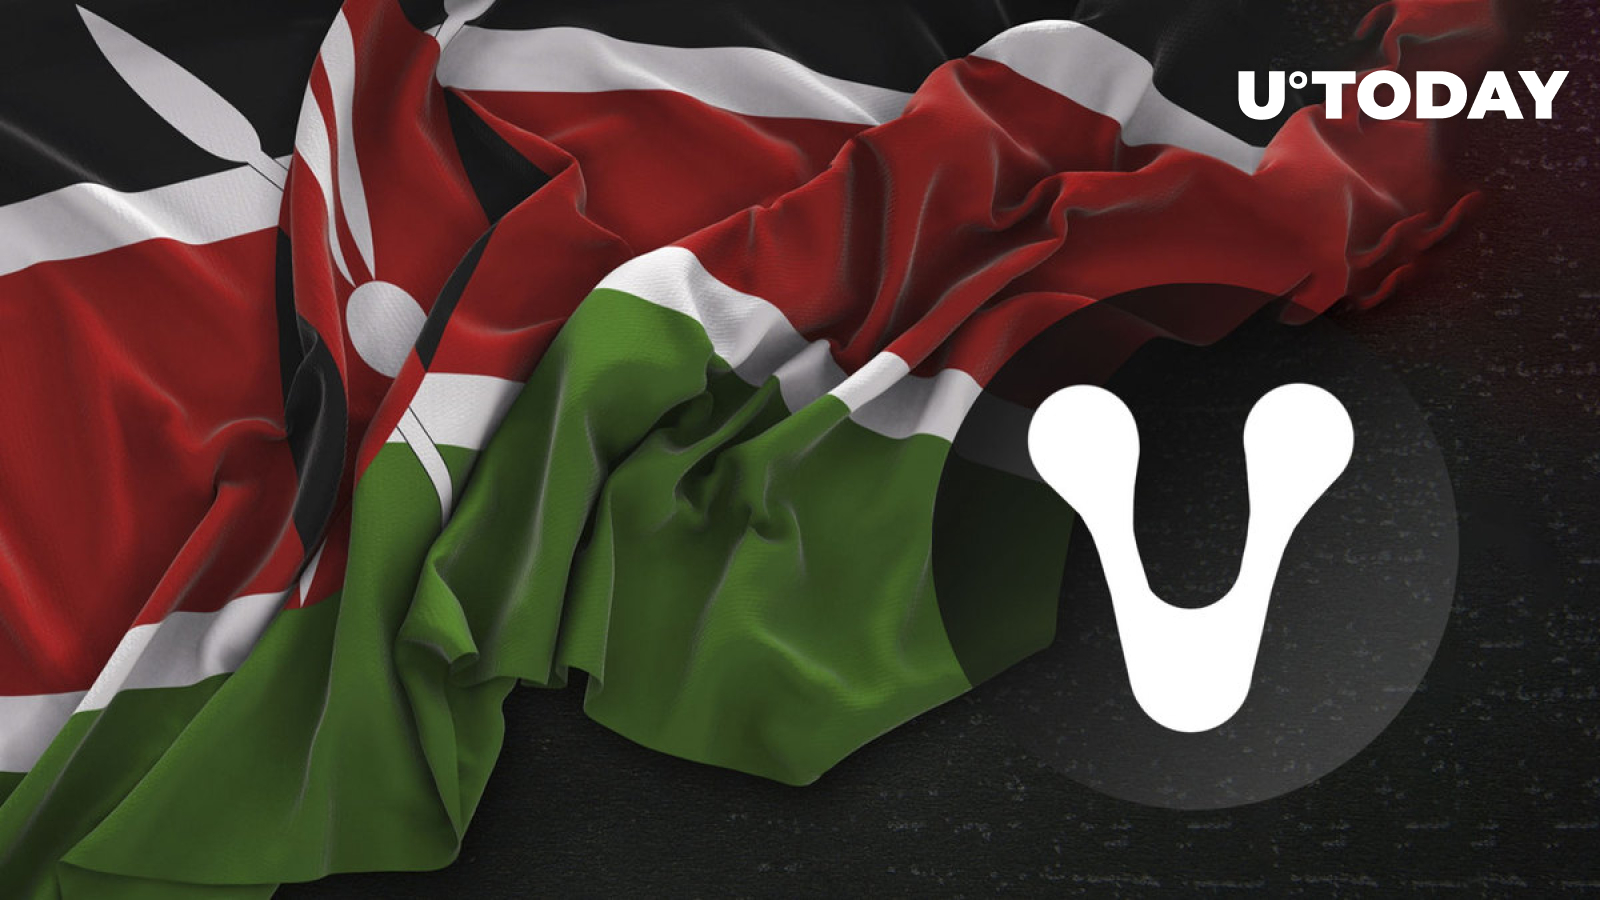 Venom Foundation and Kenya join forces to launch African Blockchain Hub